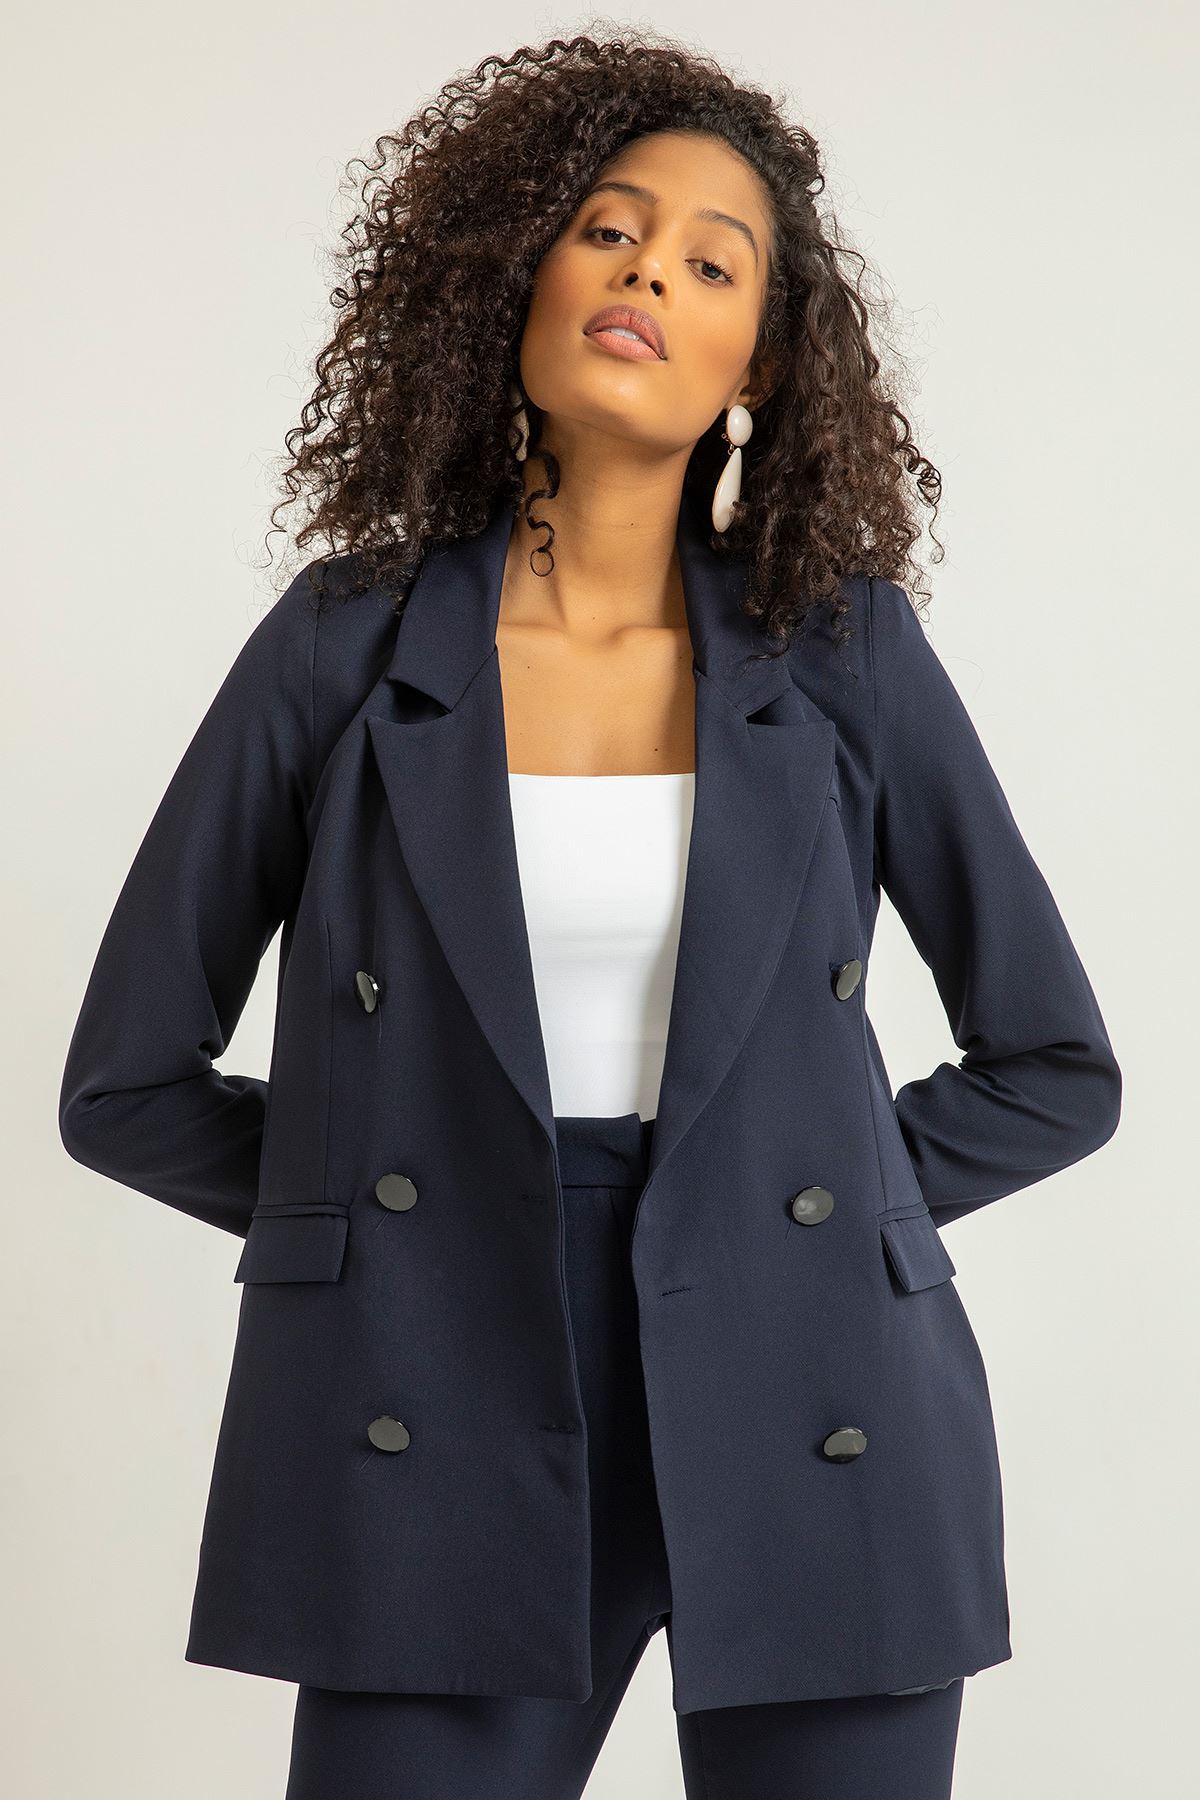 Polyester Fabric Revere Collar Below Hip Classical Double Button Women Jacket - Navy Blue 